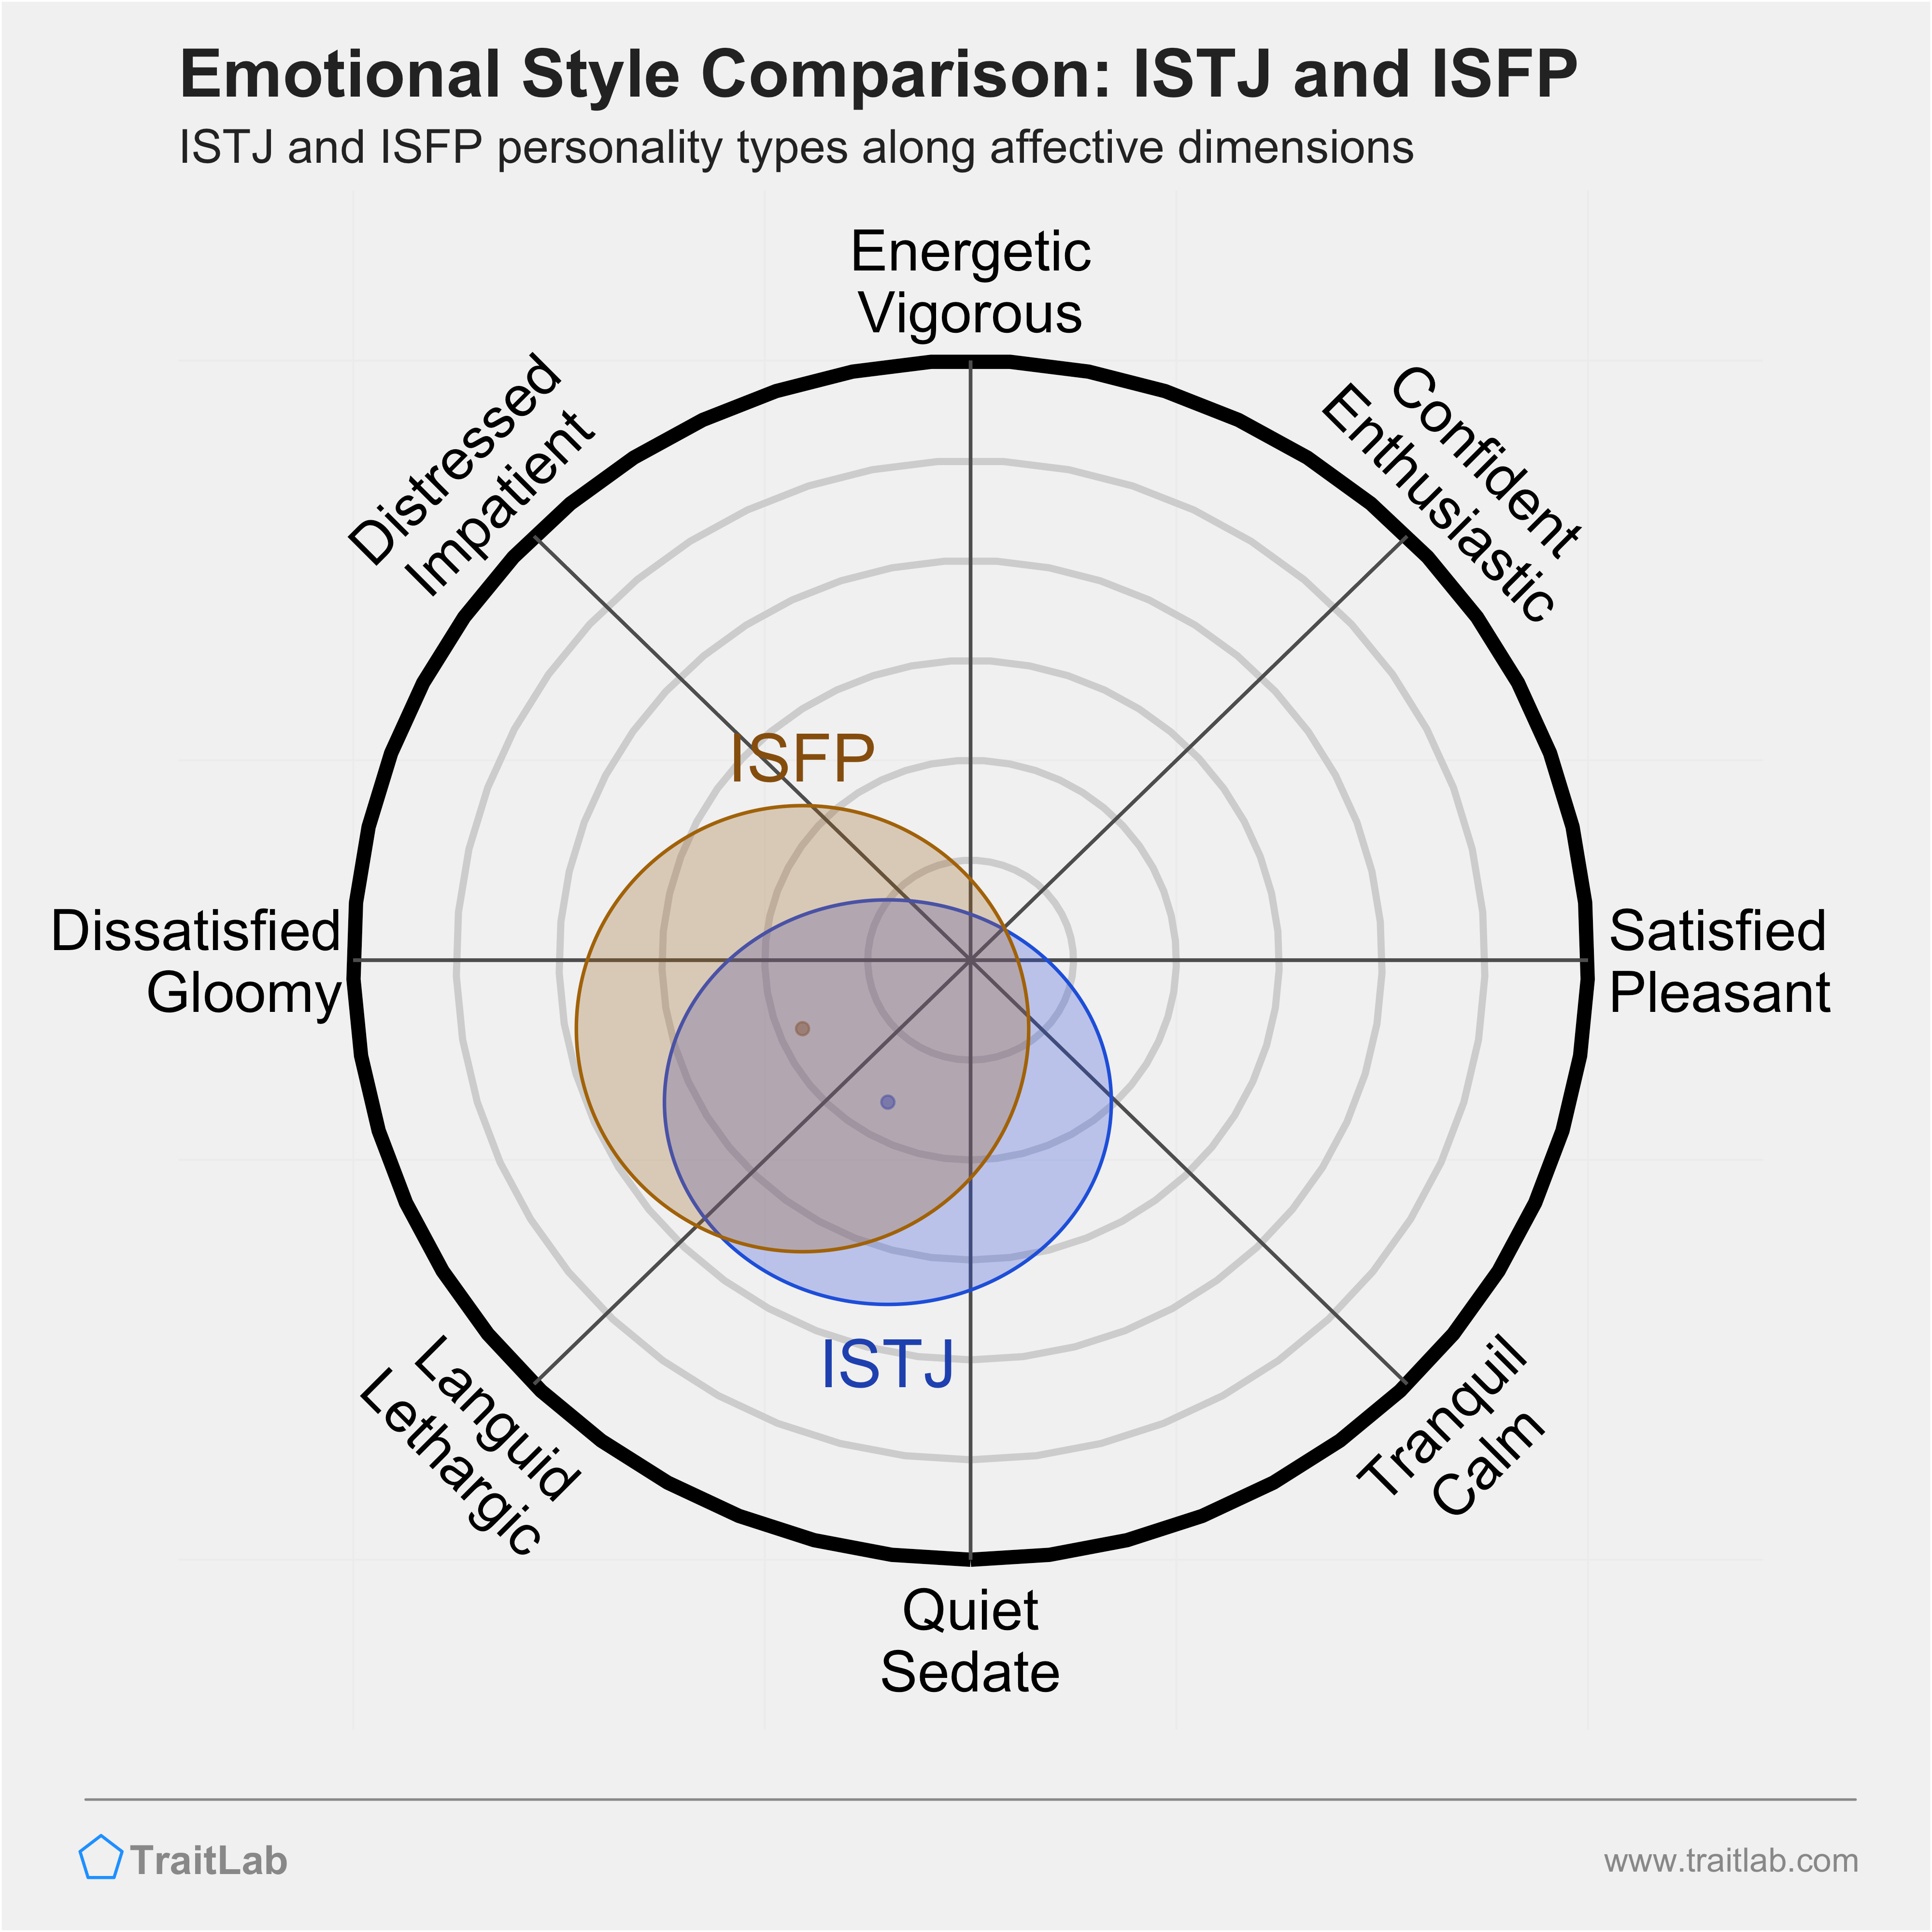 ISTJ and ISFP comparison across emotional (affective) dimensions